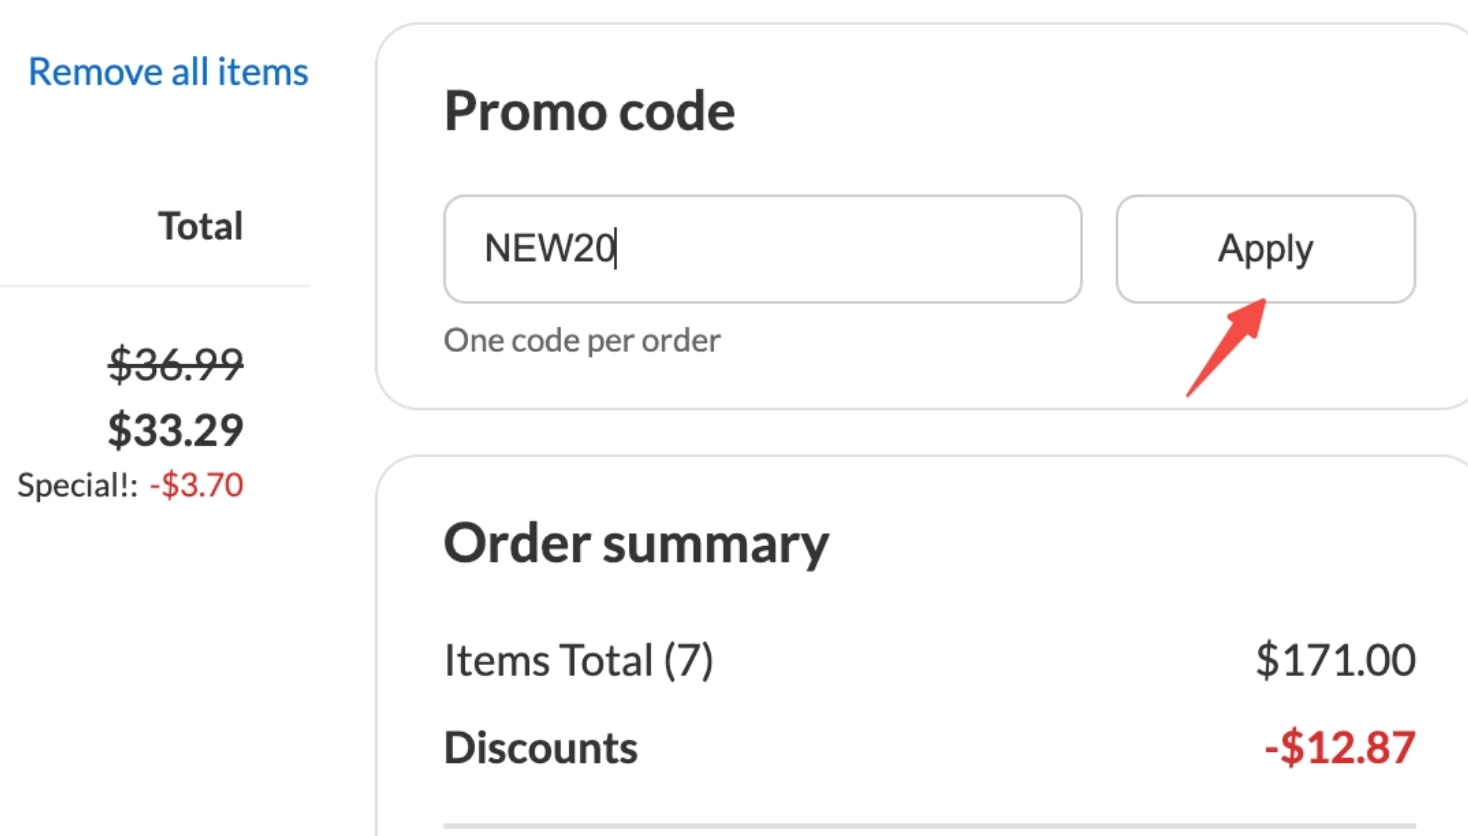 Step 3: When checking out at play.google.com, paste the discount code into the specified promotional code box.